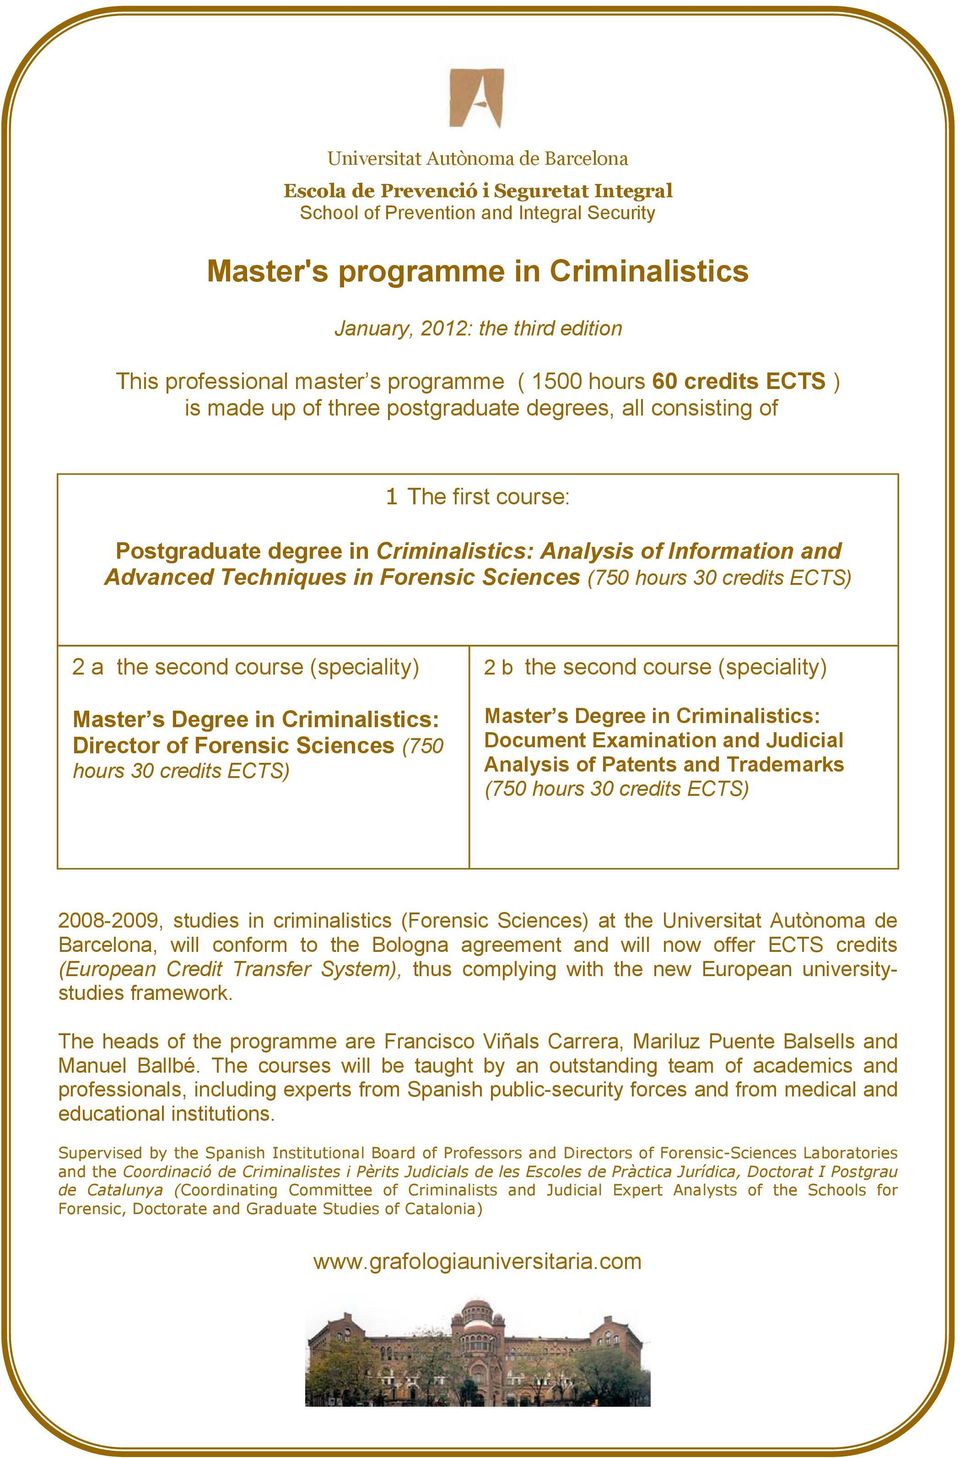 Information and Advanced Techniques in Forensic Sciences (750 hours 30 credits ECTS) 2 a the second course (speciality) Master s Degree in Criminalistics: Director of Forensic Sciences (750 hours 30